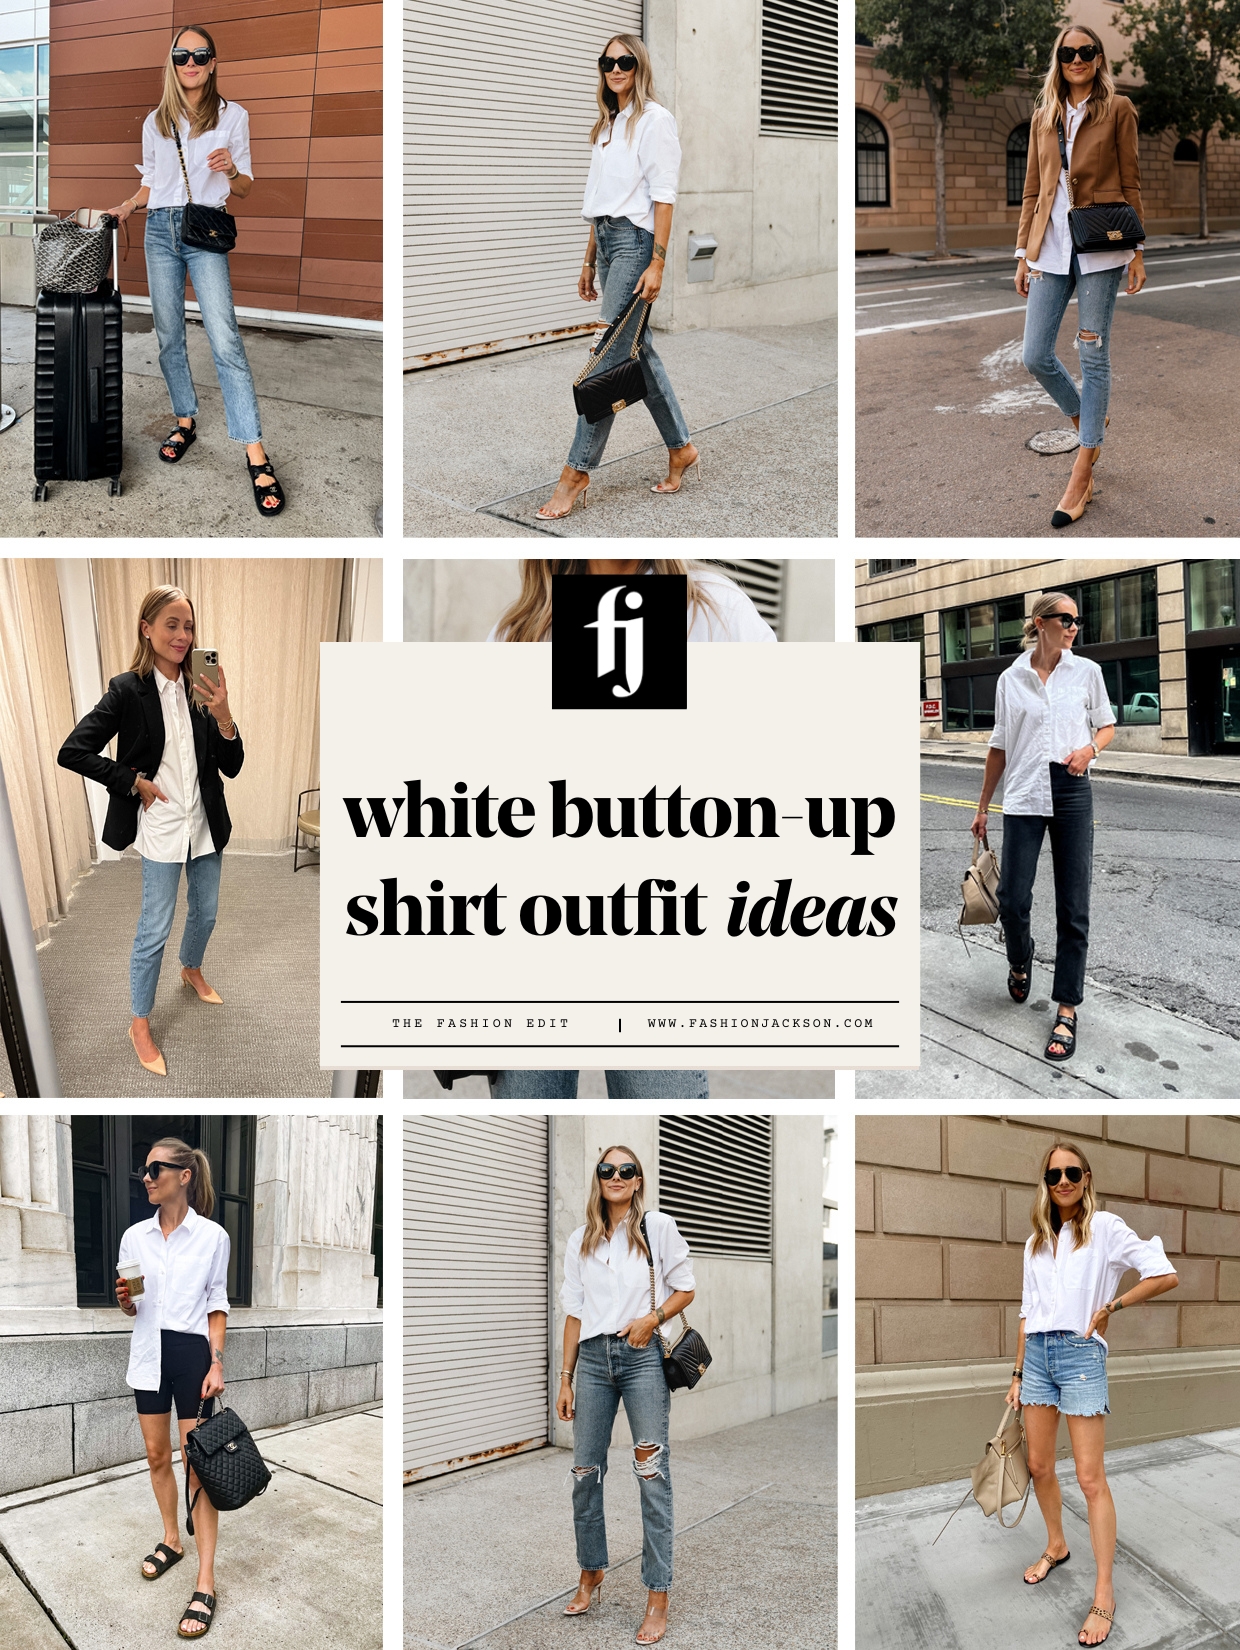 5 Ways to Style a White Button-up Shirt · The RELM & Co